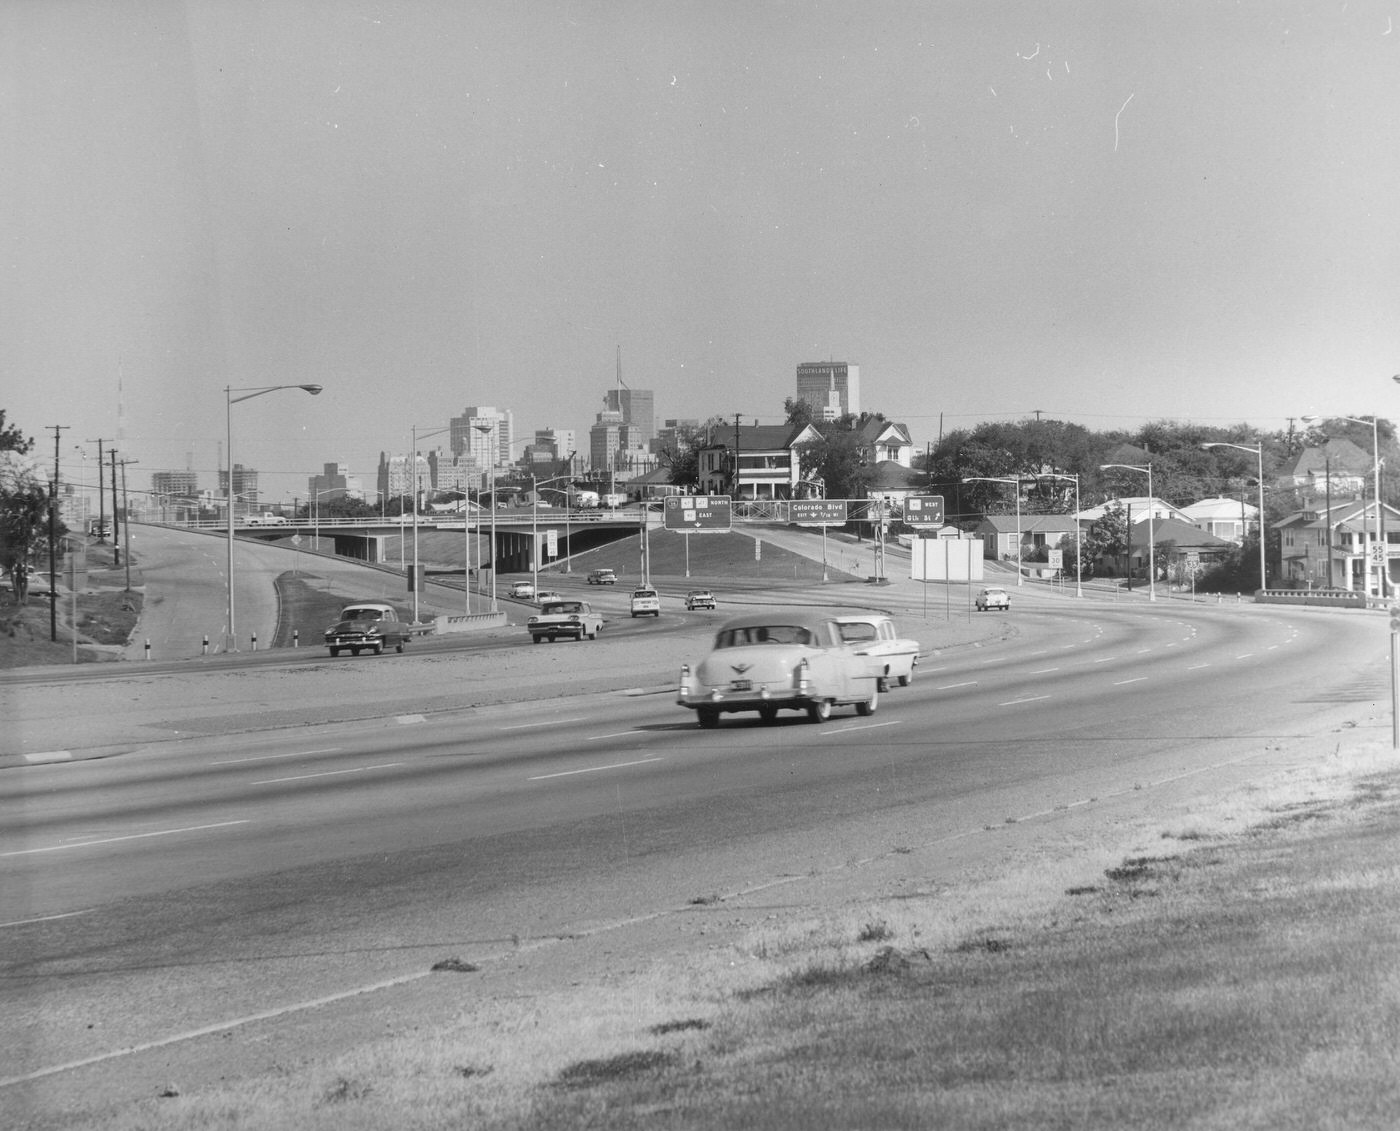 Highway with exit signs "Colorado Blvd" and connections to I-35, Highway. 67 and 77 North and 80 East, and 80 West, Dallas, 1960s